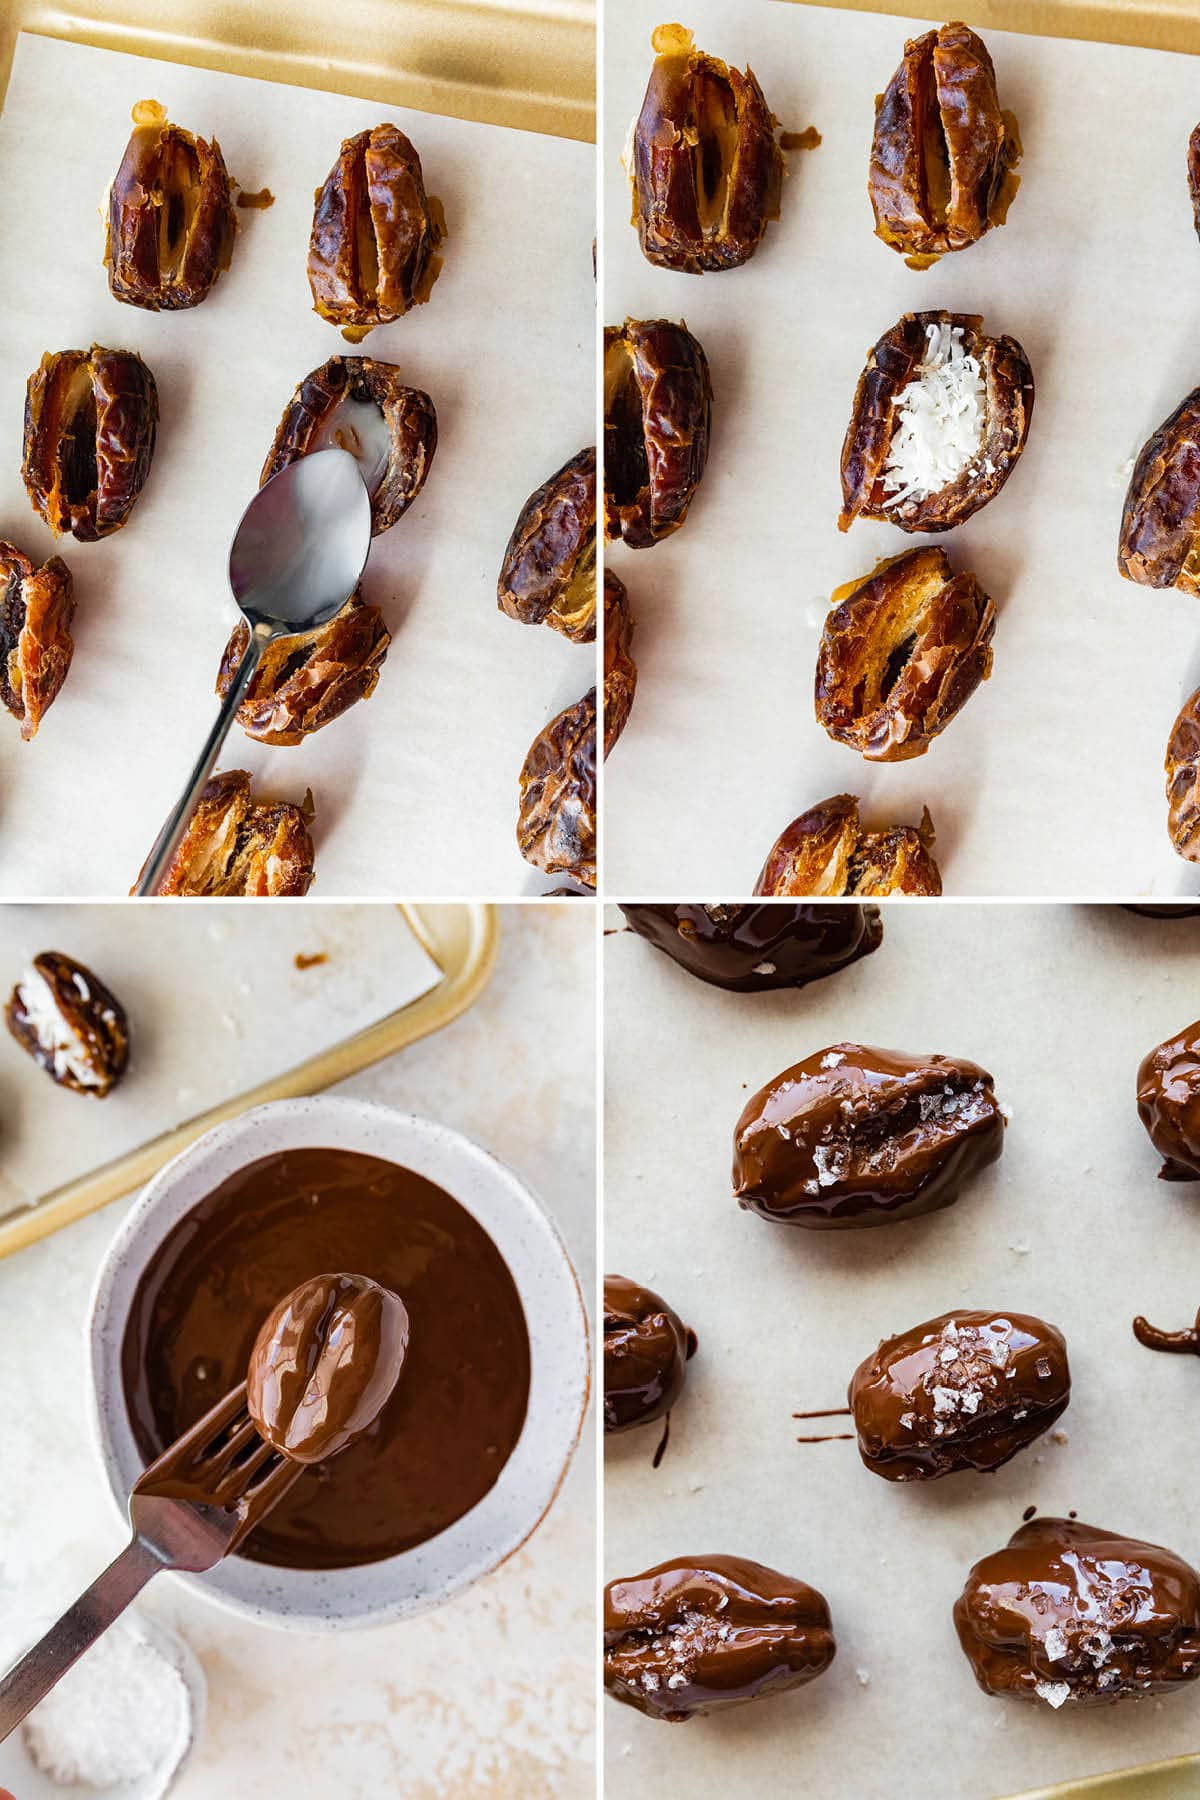 Four photos showing the steps to make Date Mounds Bars: filling with coconut butter and coconut, dipping in melted chocolate and then topping with sea salt.